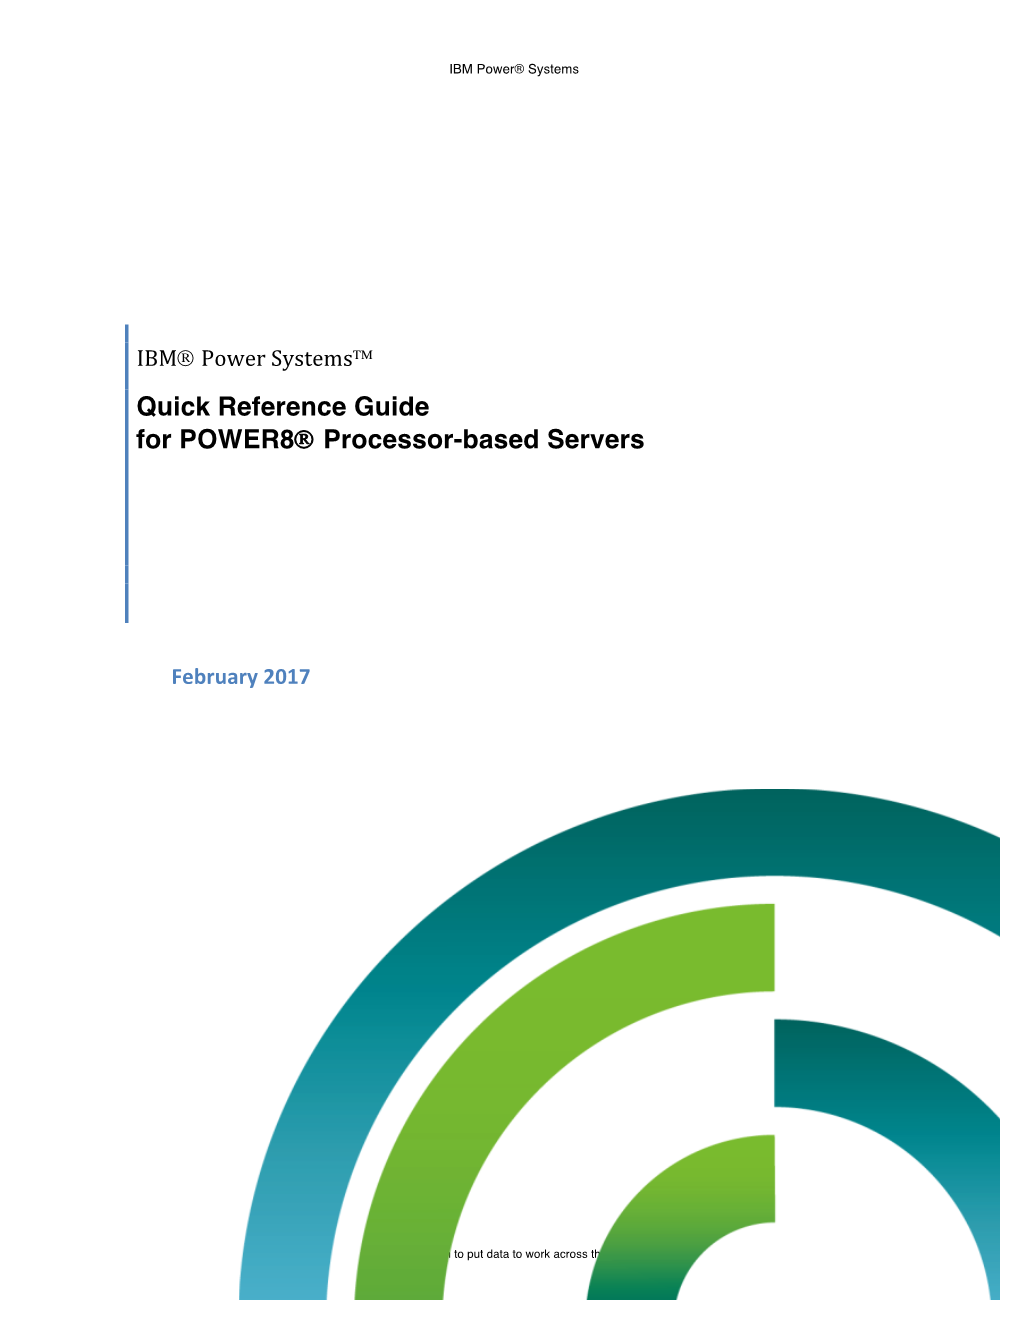 Quick Reference Guide for POWER8® Processor-Based Servers